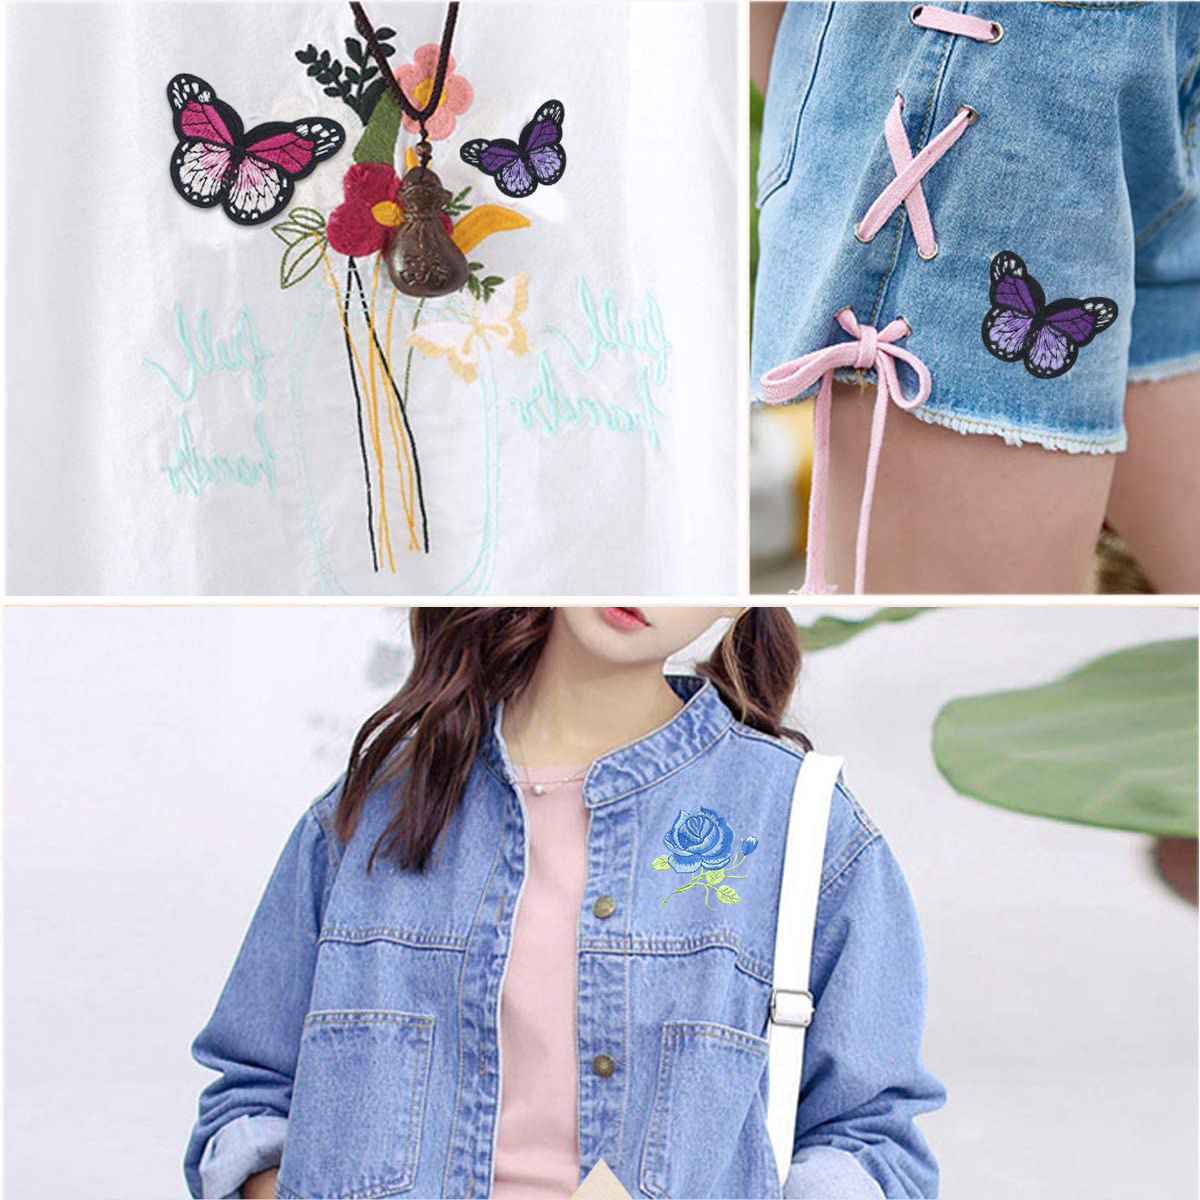 16pcs Embroidery Applique Patches Rose Flowers Butterfly Iron On - image 5 of 7